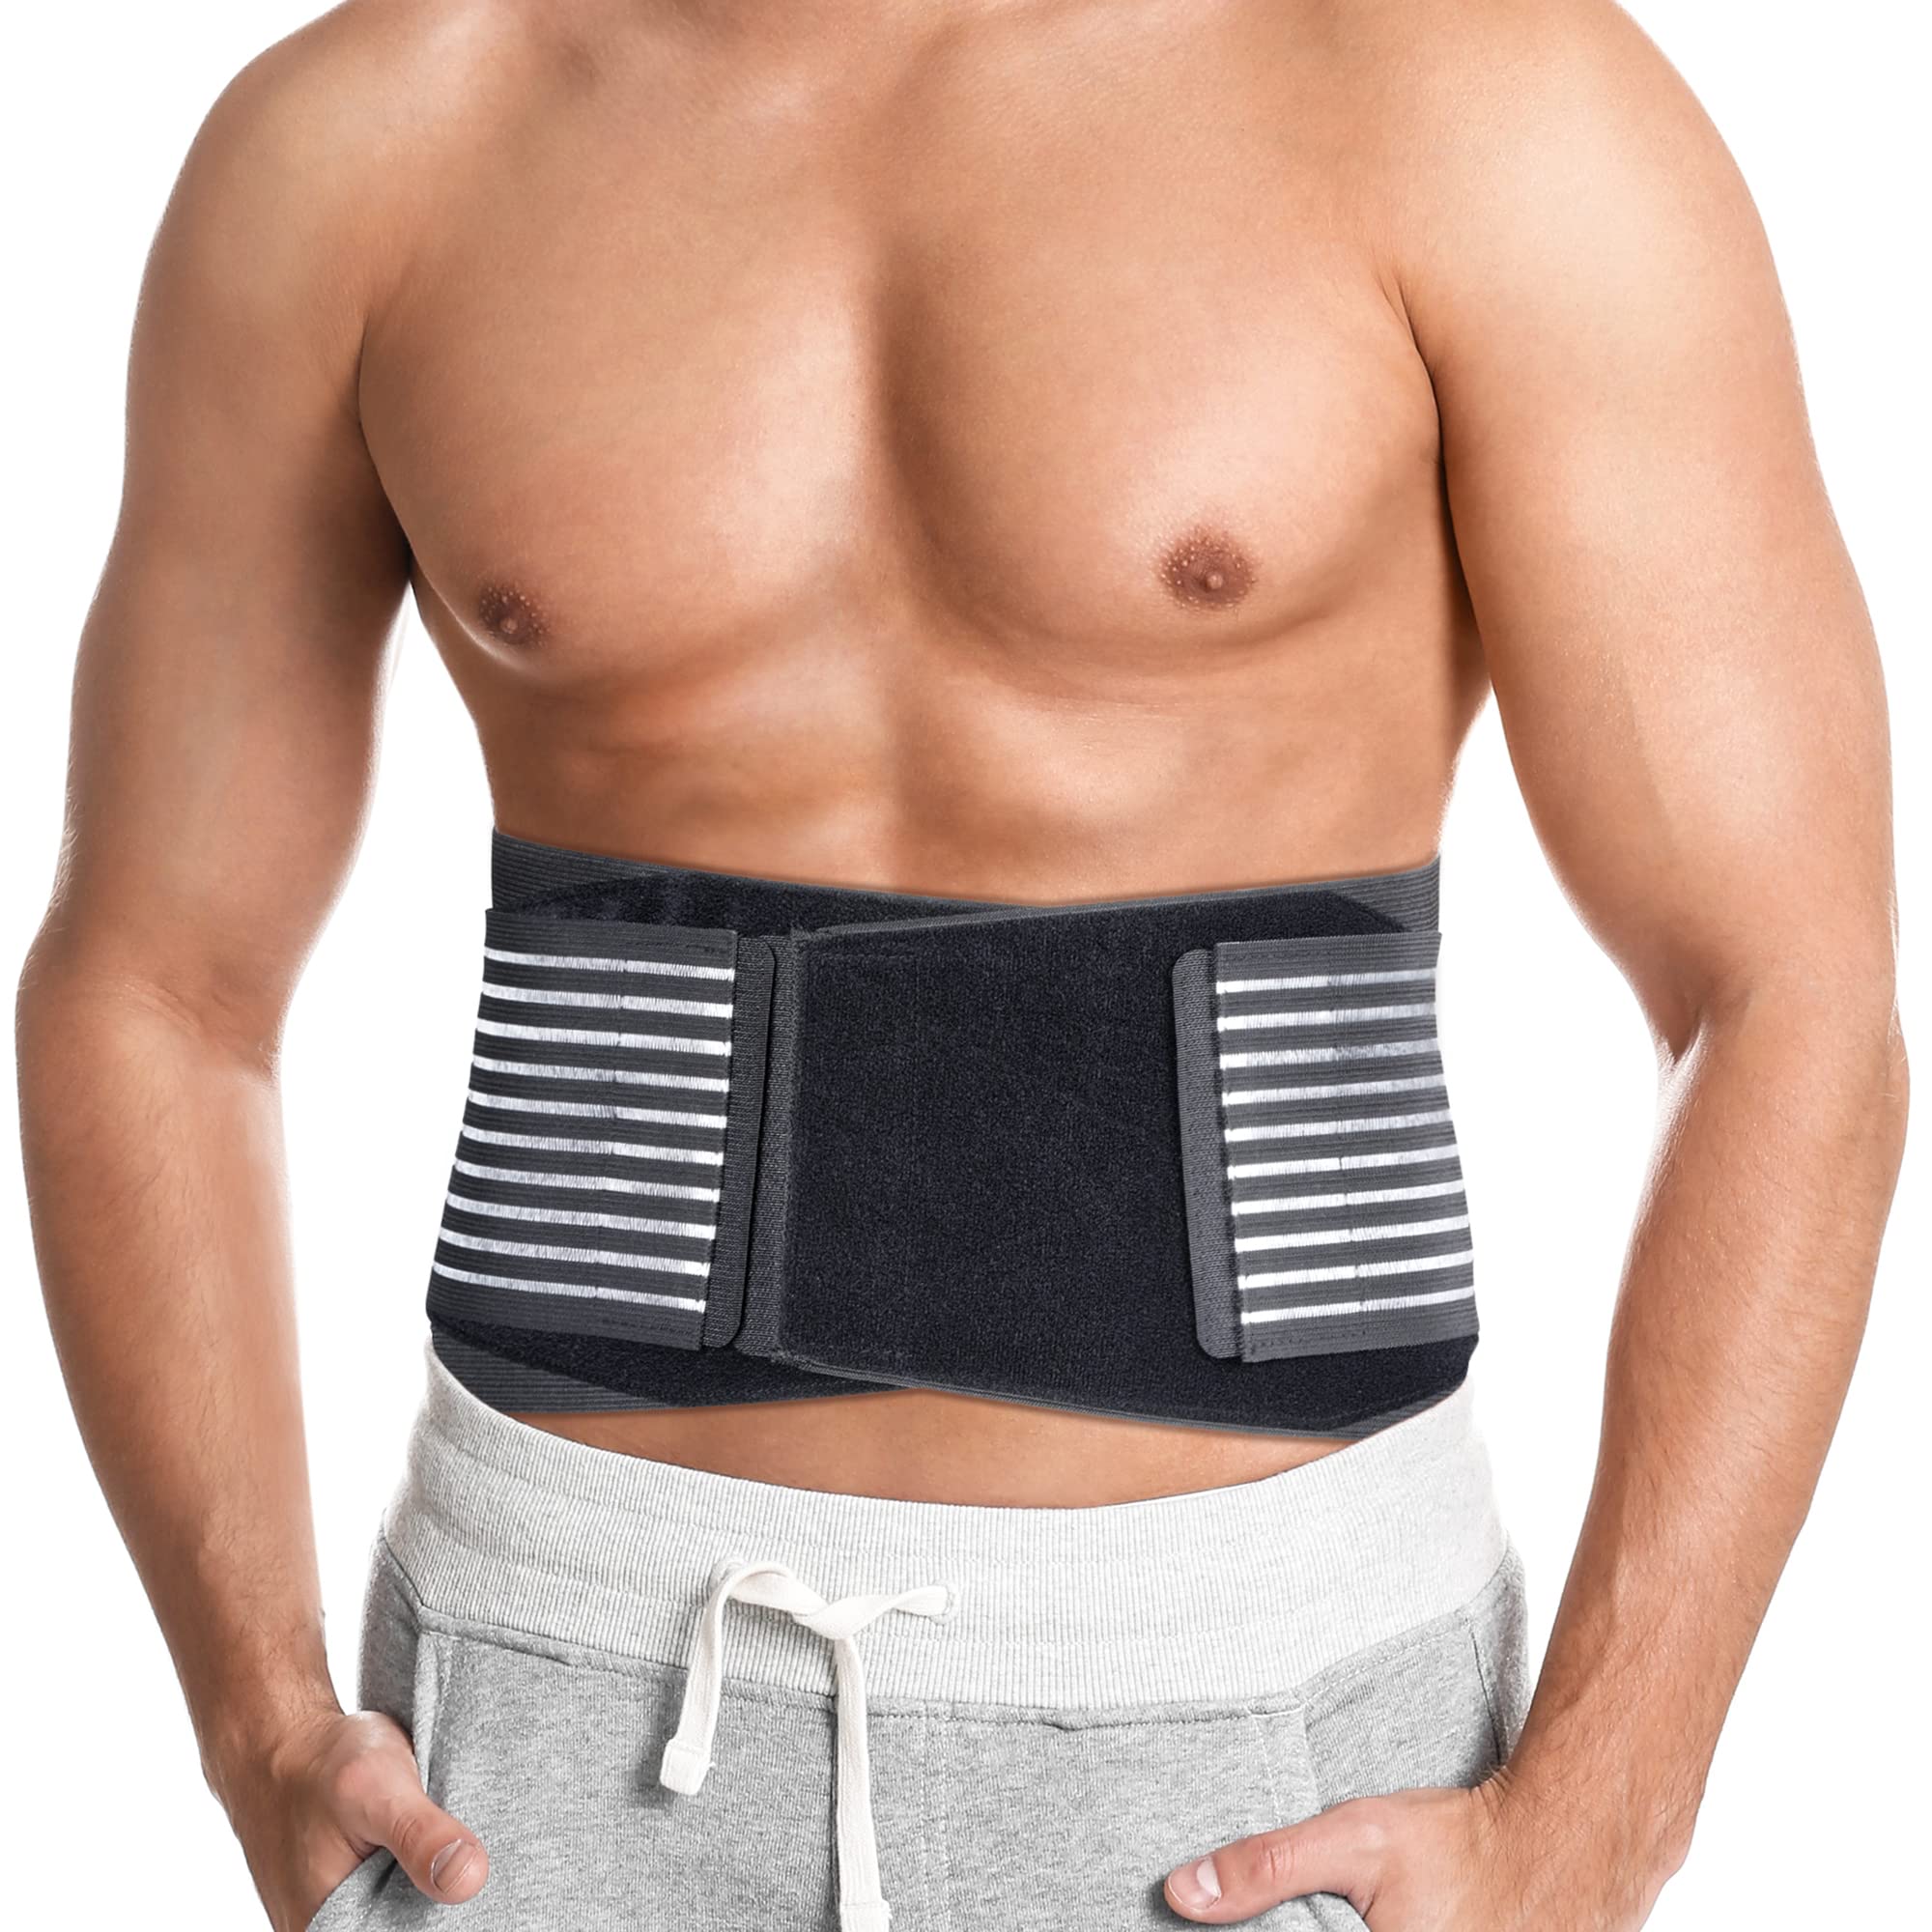 Lumbar Lower Back Brace Support Belt for Back Pain Relief, Herniated Disc,  Sciatica, Scoliosis - Body Shaper Belt, Adjustable Workout Waist Trainer